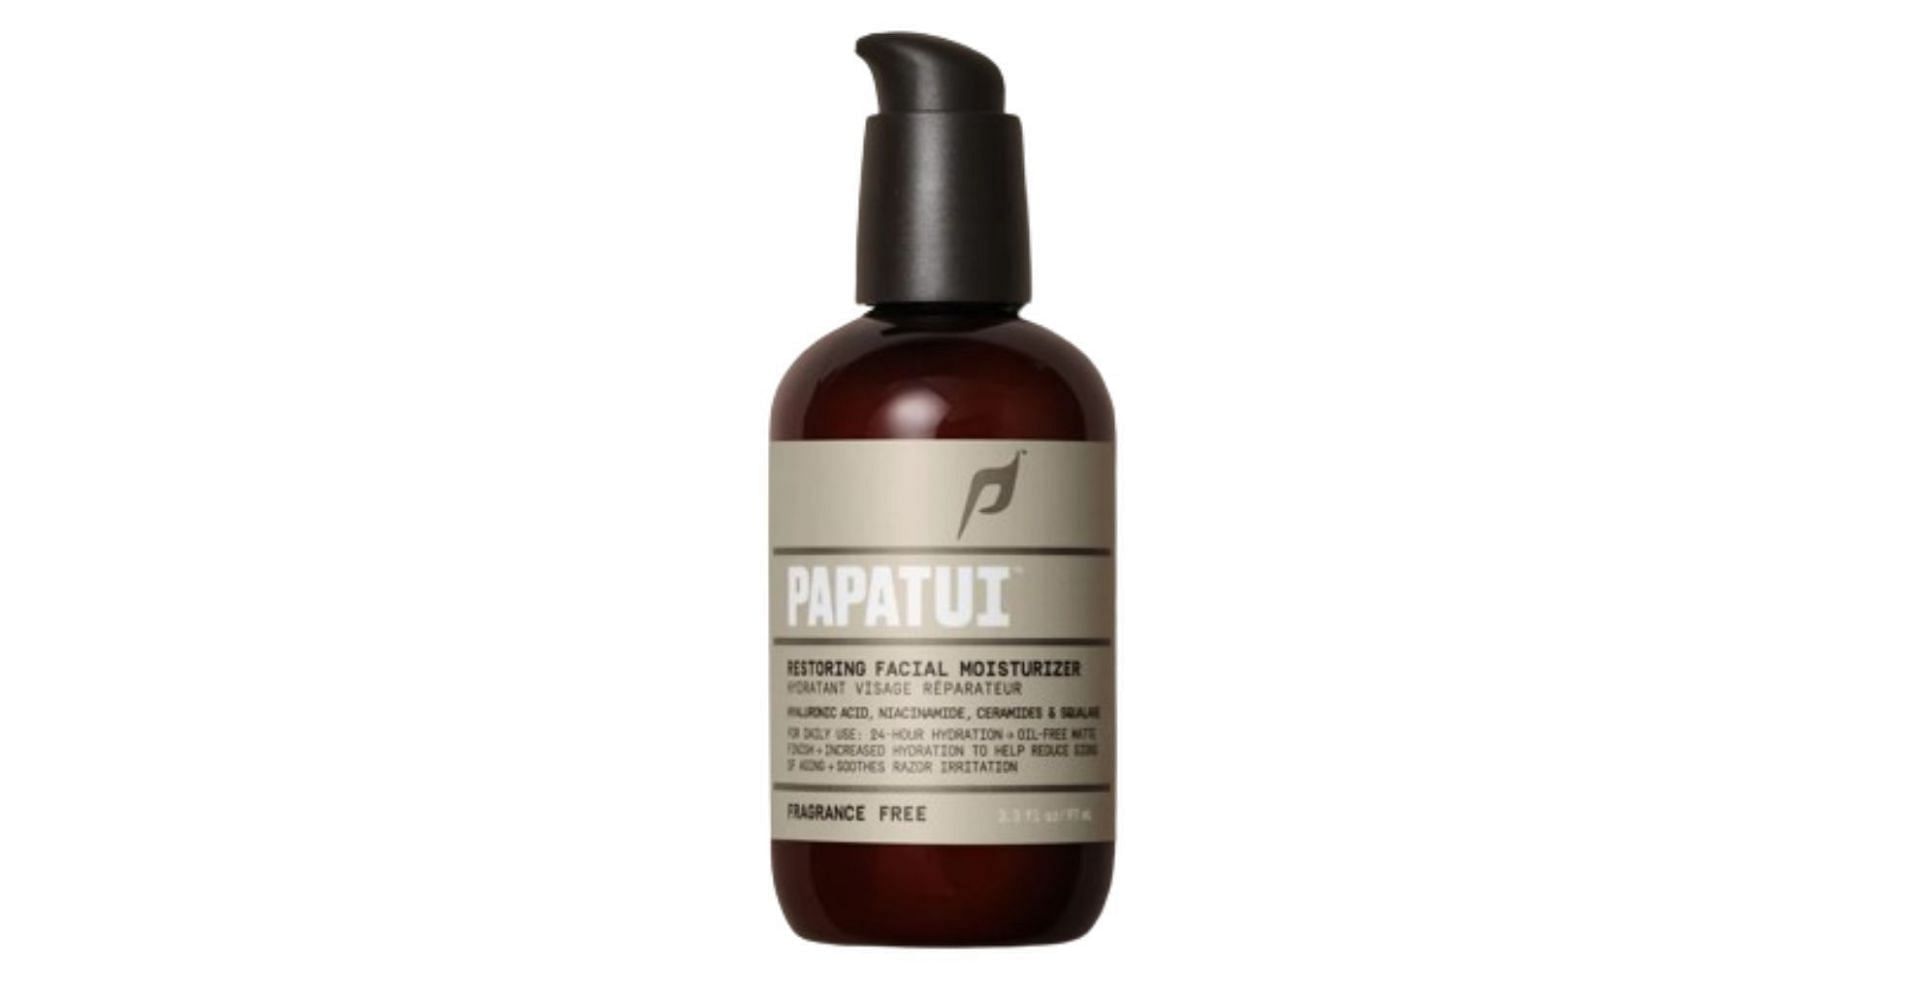 4 Best facial skincare products from Dwayne Johnson&rsquo;s Papatui brand (Image Via Papatui Website)